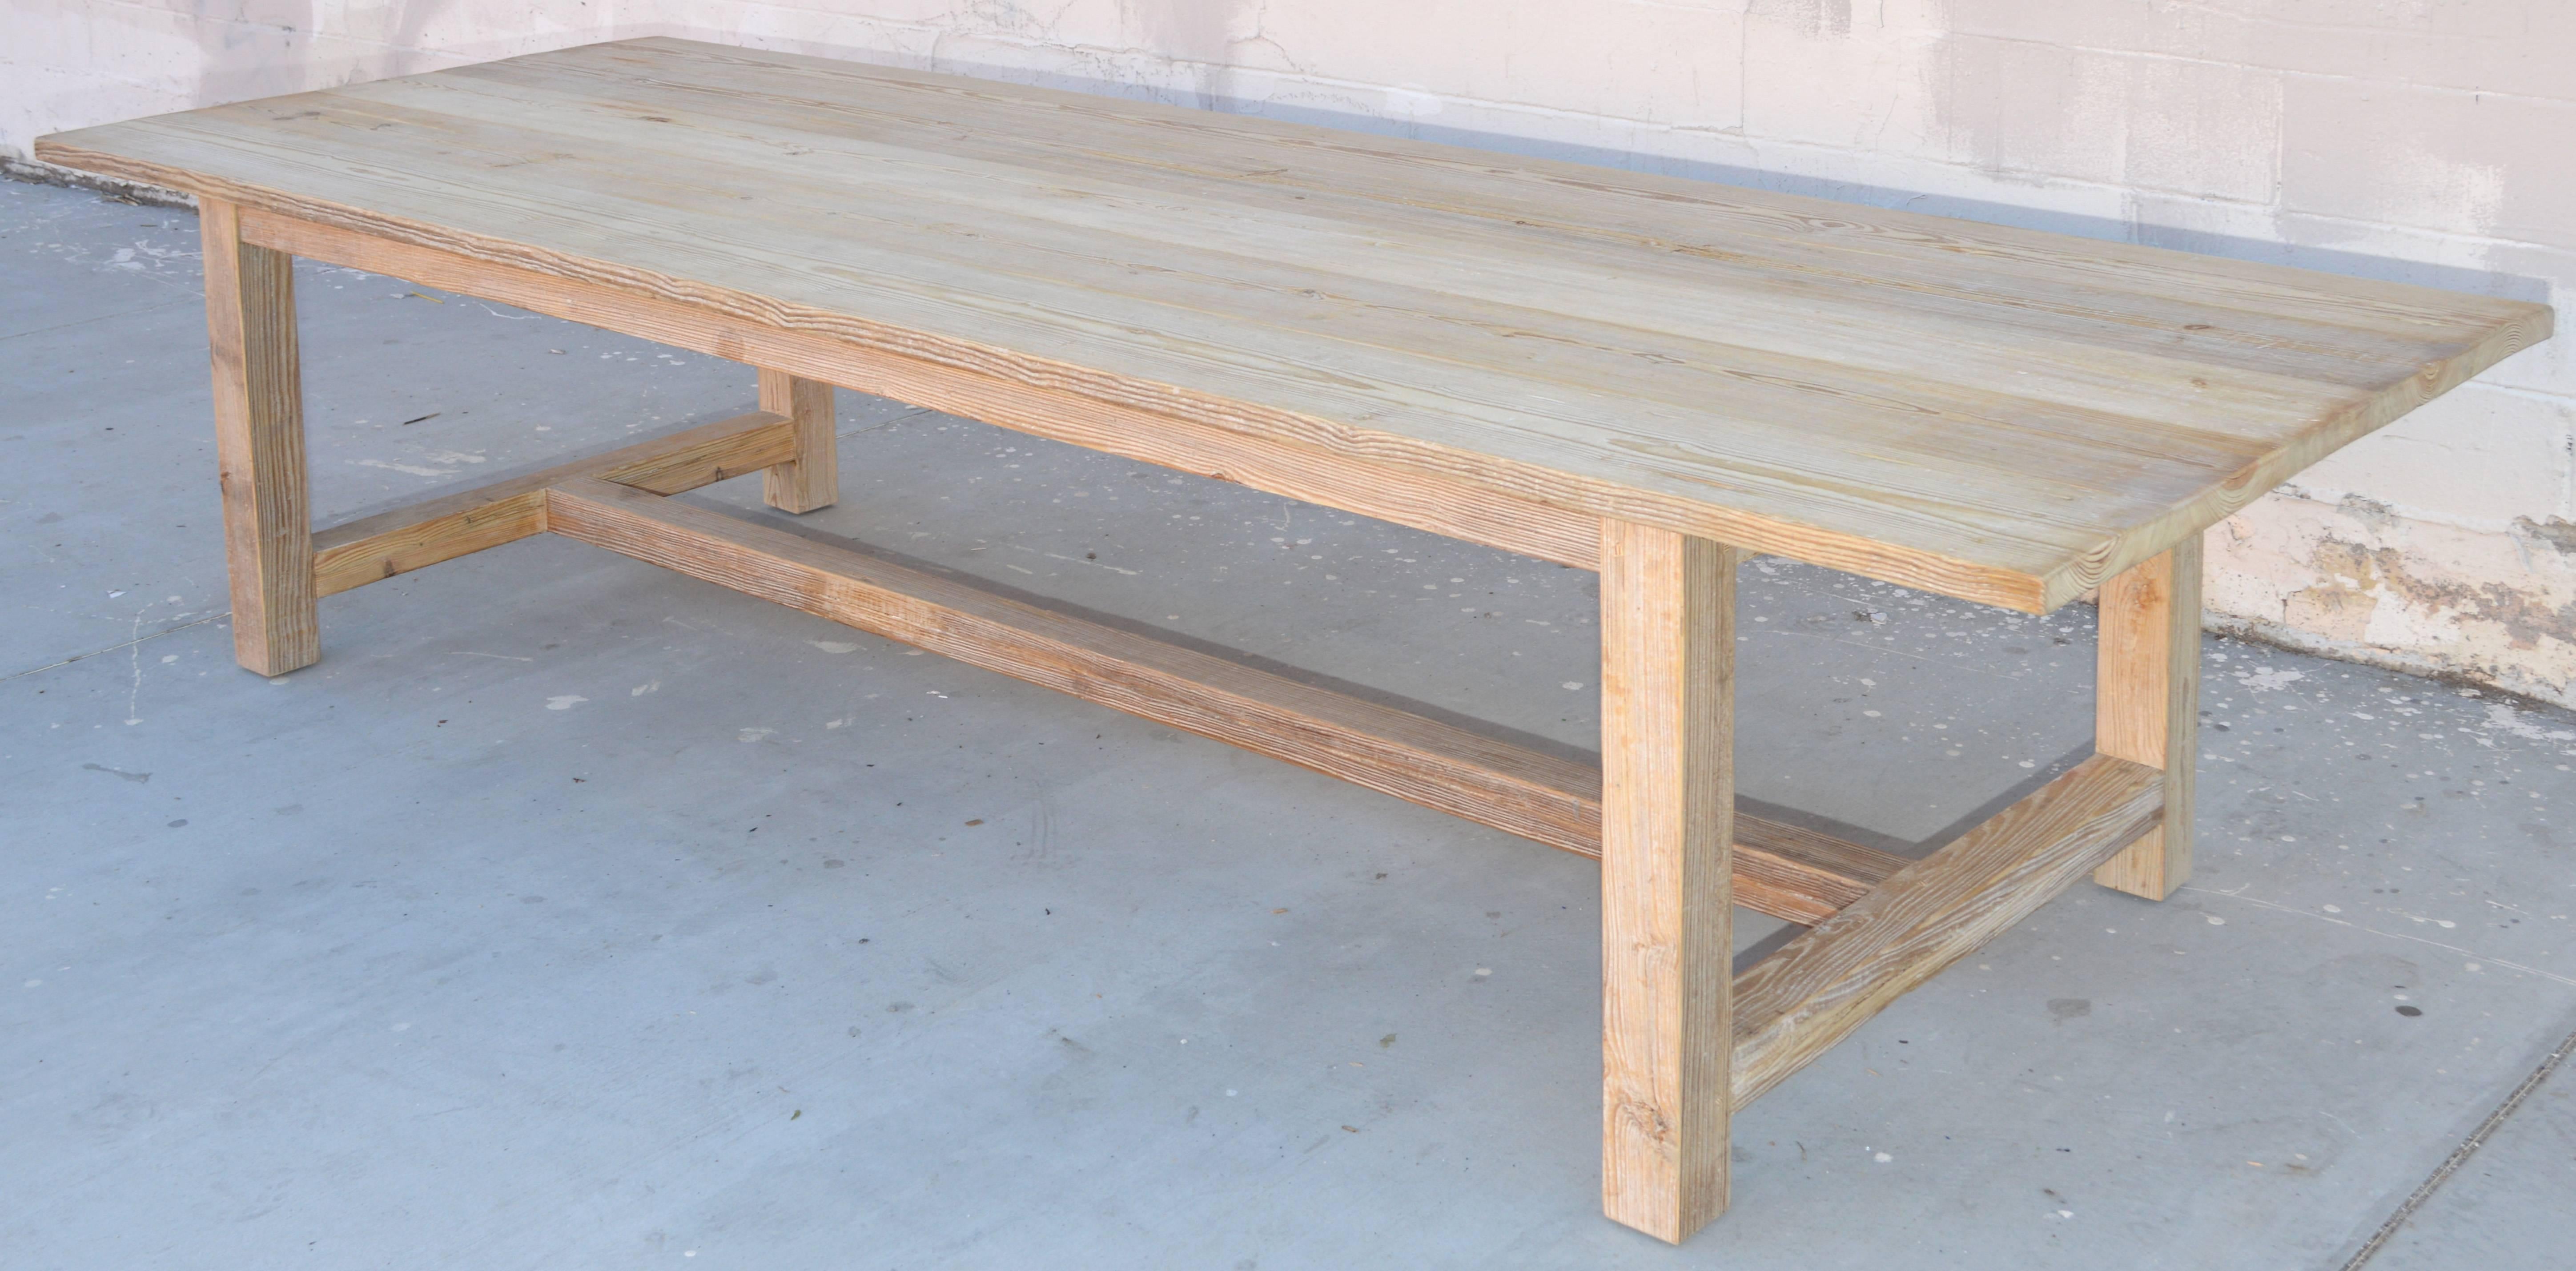 
Rustic farm or harvest table made from vintage, reclaimed wood; up to 10 feet long, with nice, natural distress. Larger sizes are available at additional cost. Other woods and finishes are also available.

We can custom build this table in any